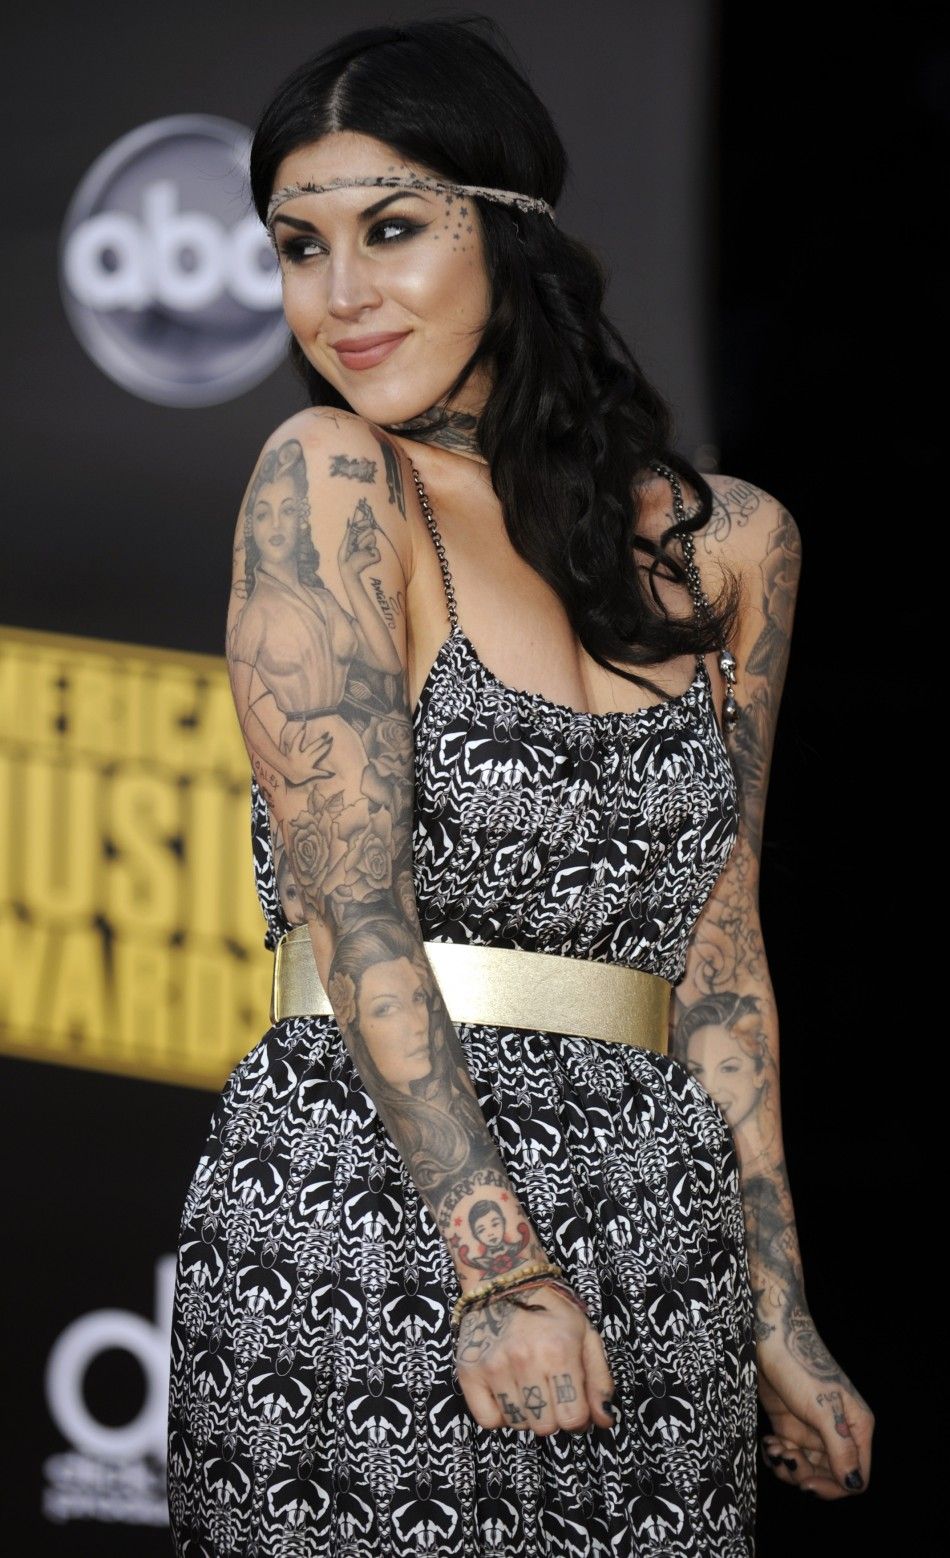 From Amy Winehouse to David Beckham Worlds Top 10 Incredible Celebrity Tattoos.